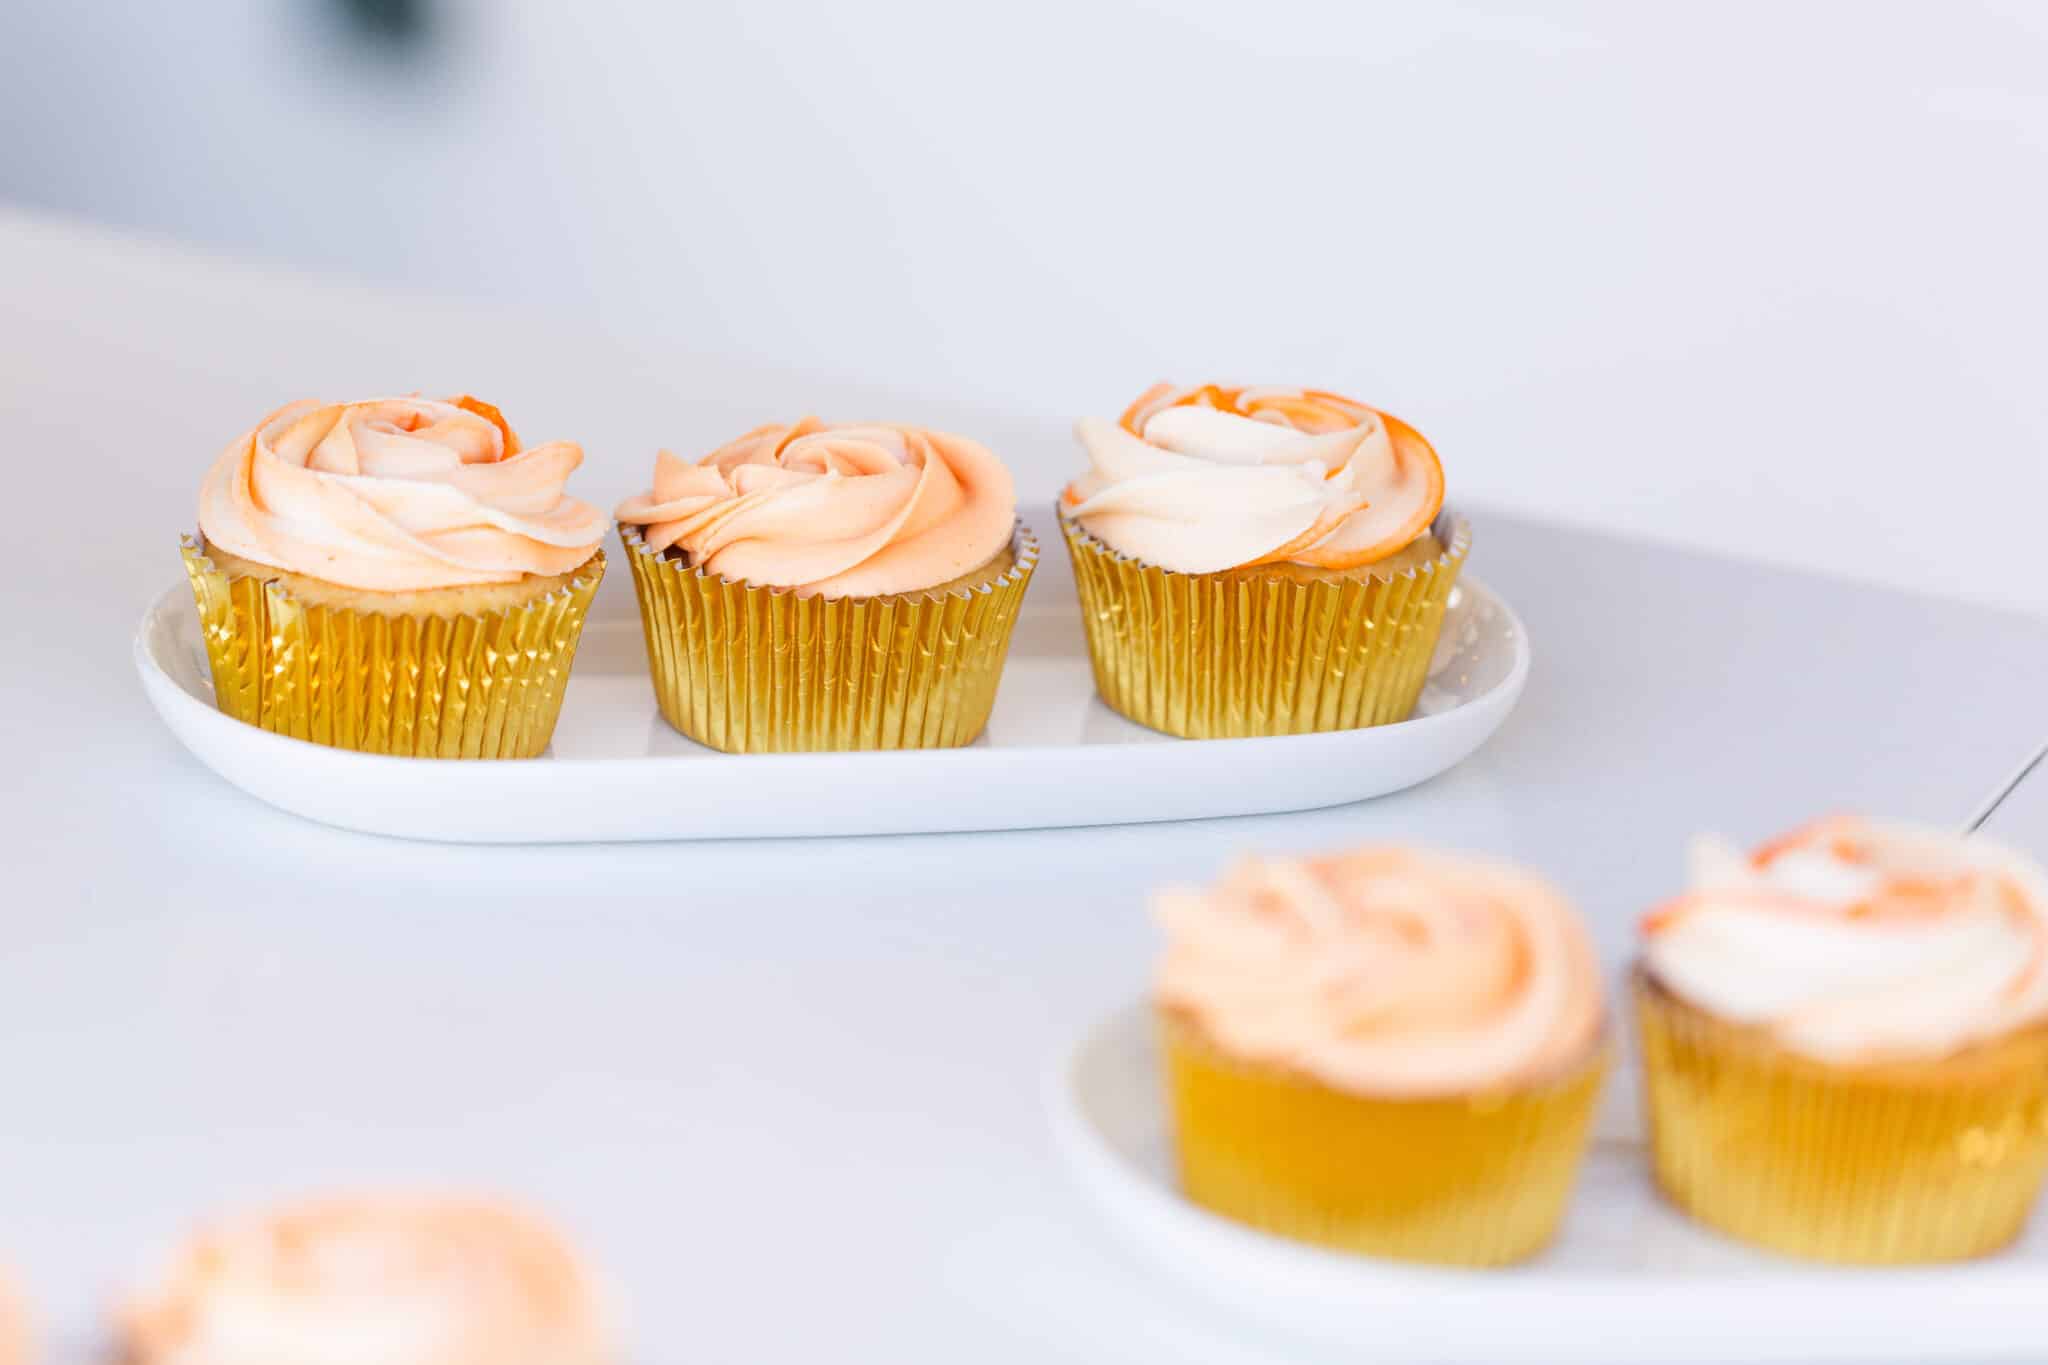 five cupcakes with golden cupcake liner and pink frosting in a rose design sit on white surface